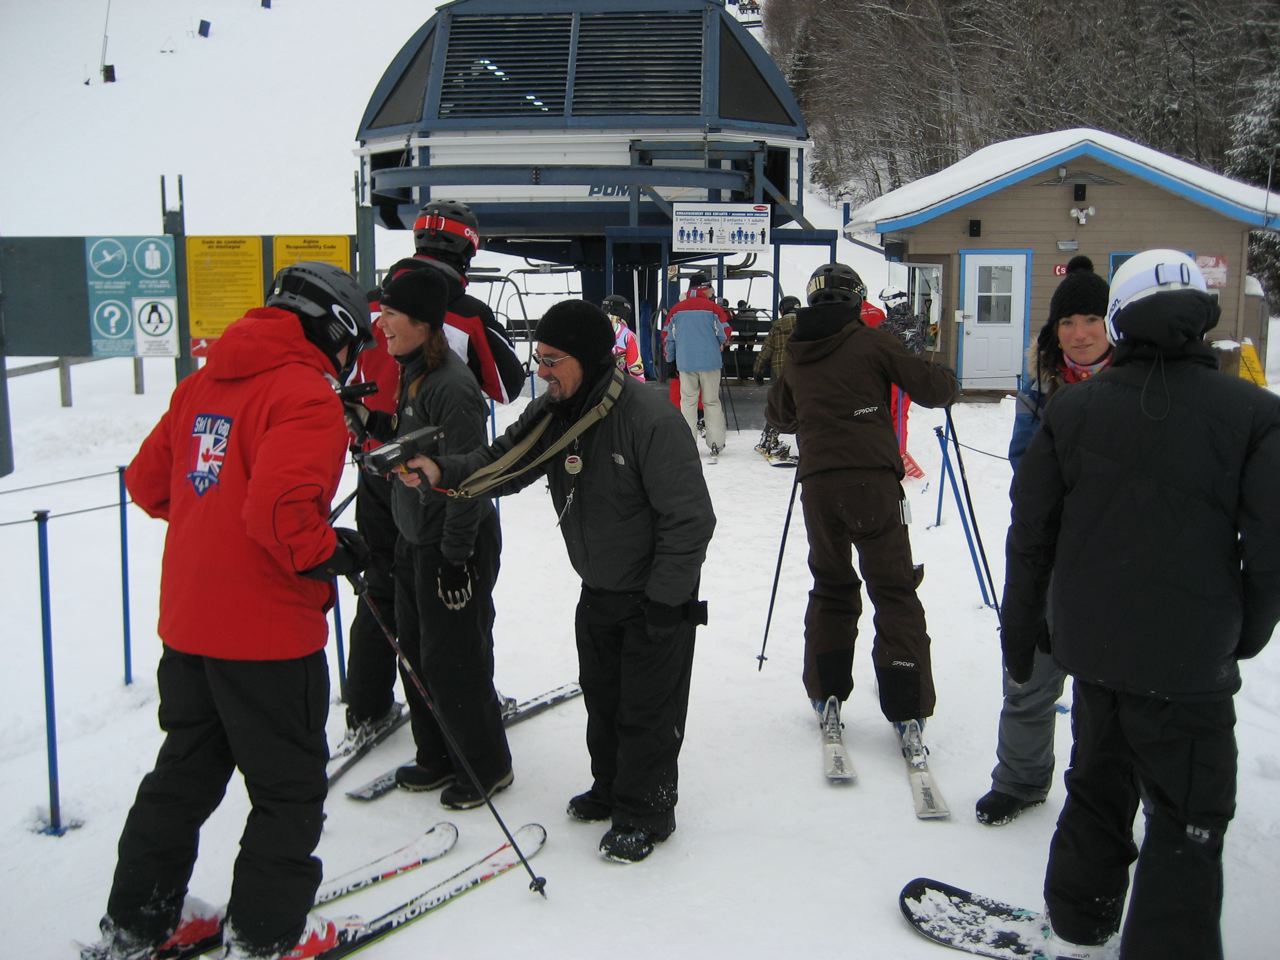 www.tremblant360.com Photo. All rights reserved.